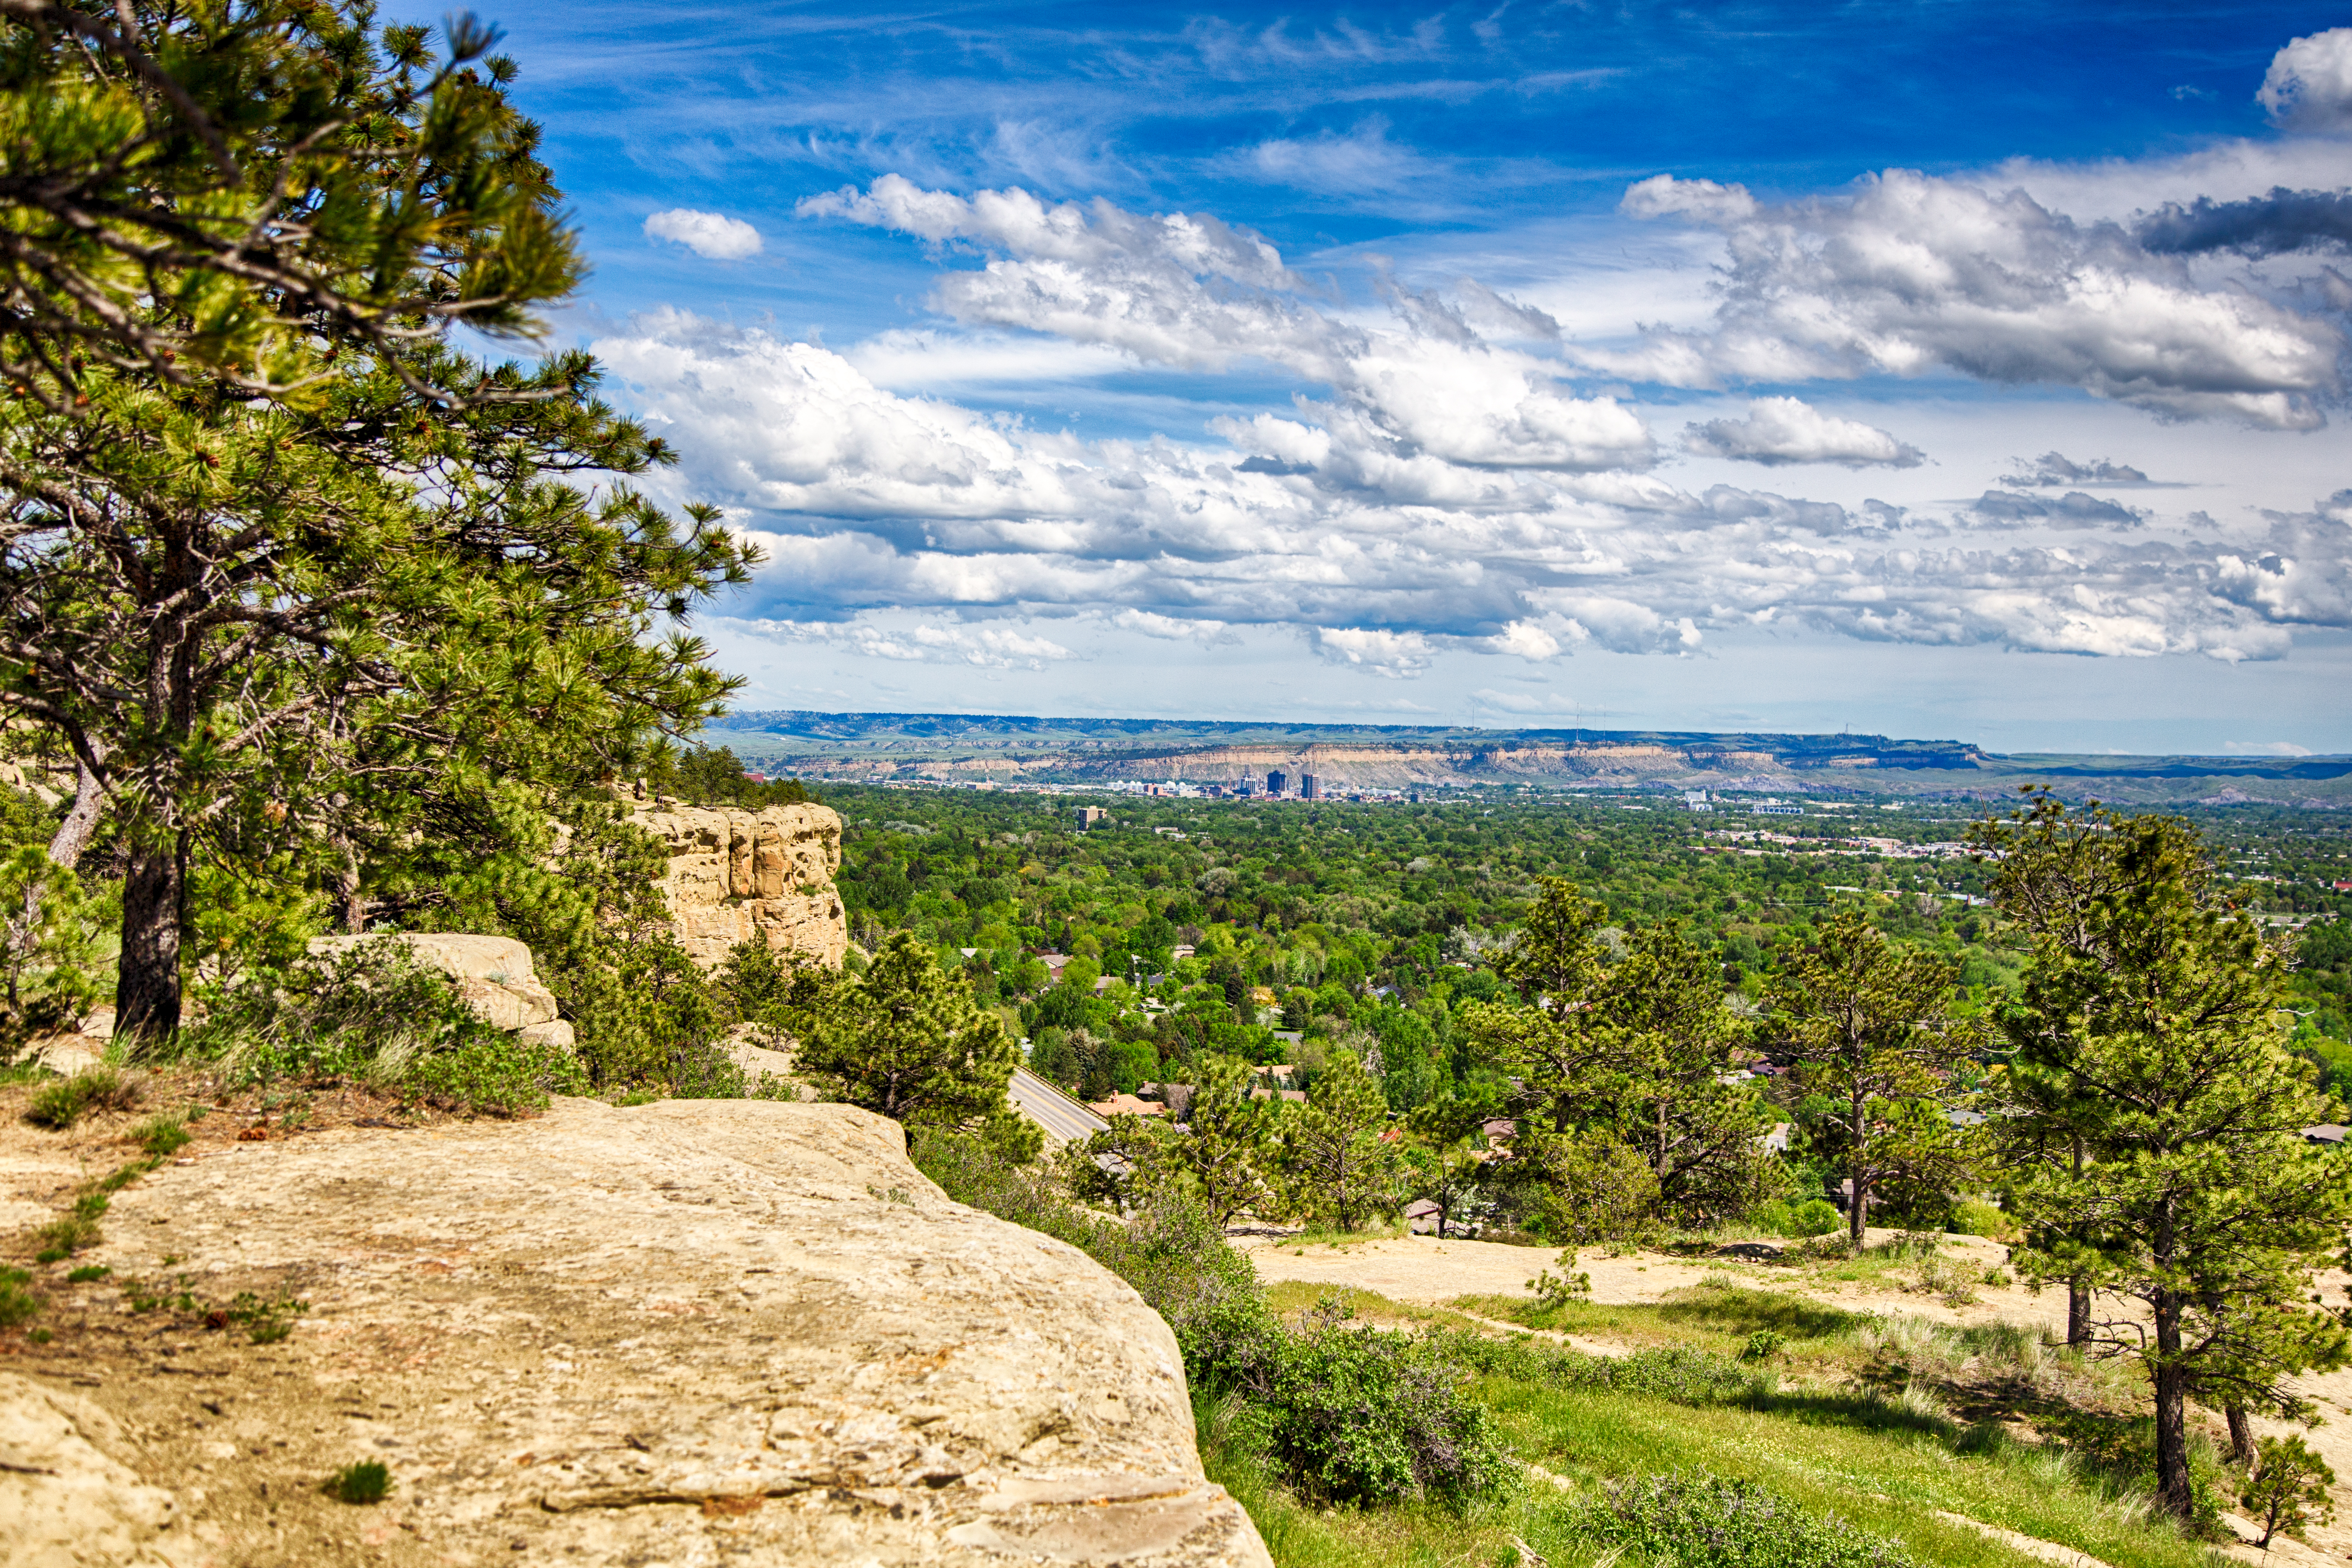 The view from the top of the sandstone bluffs surrounding Billings, Montana